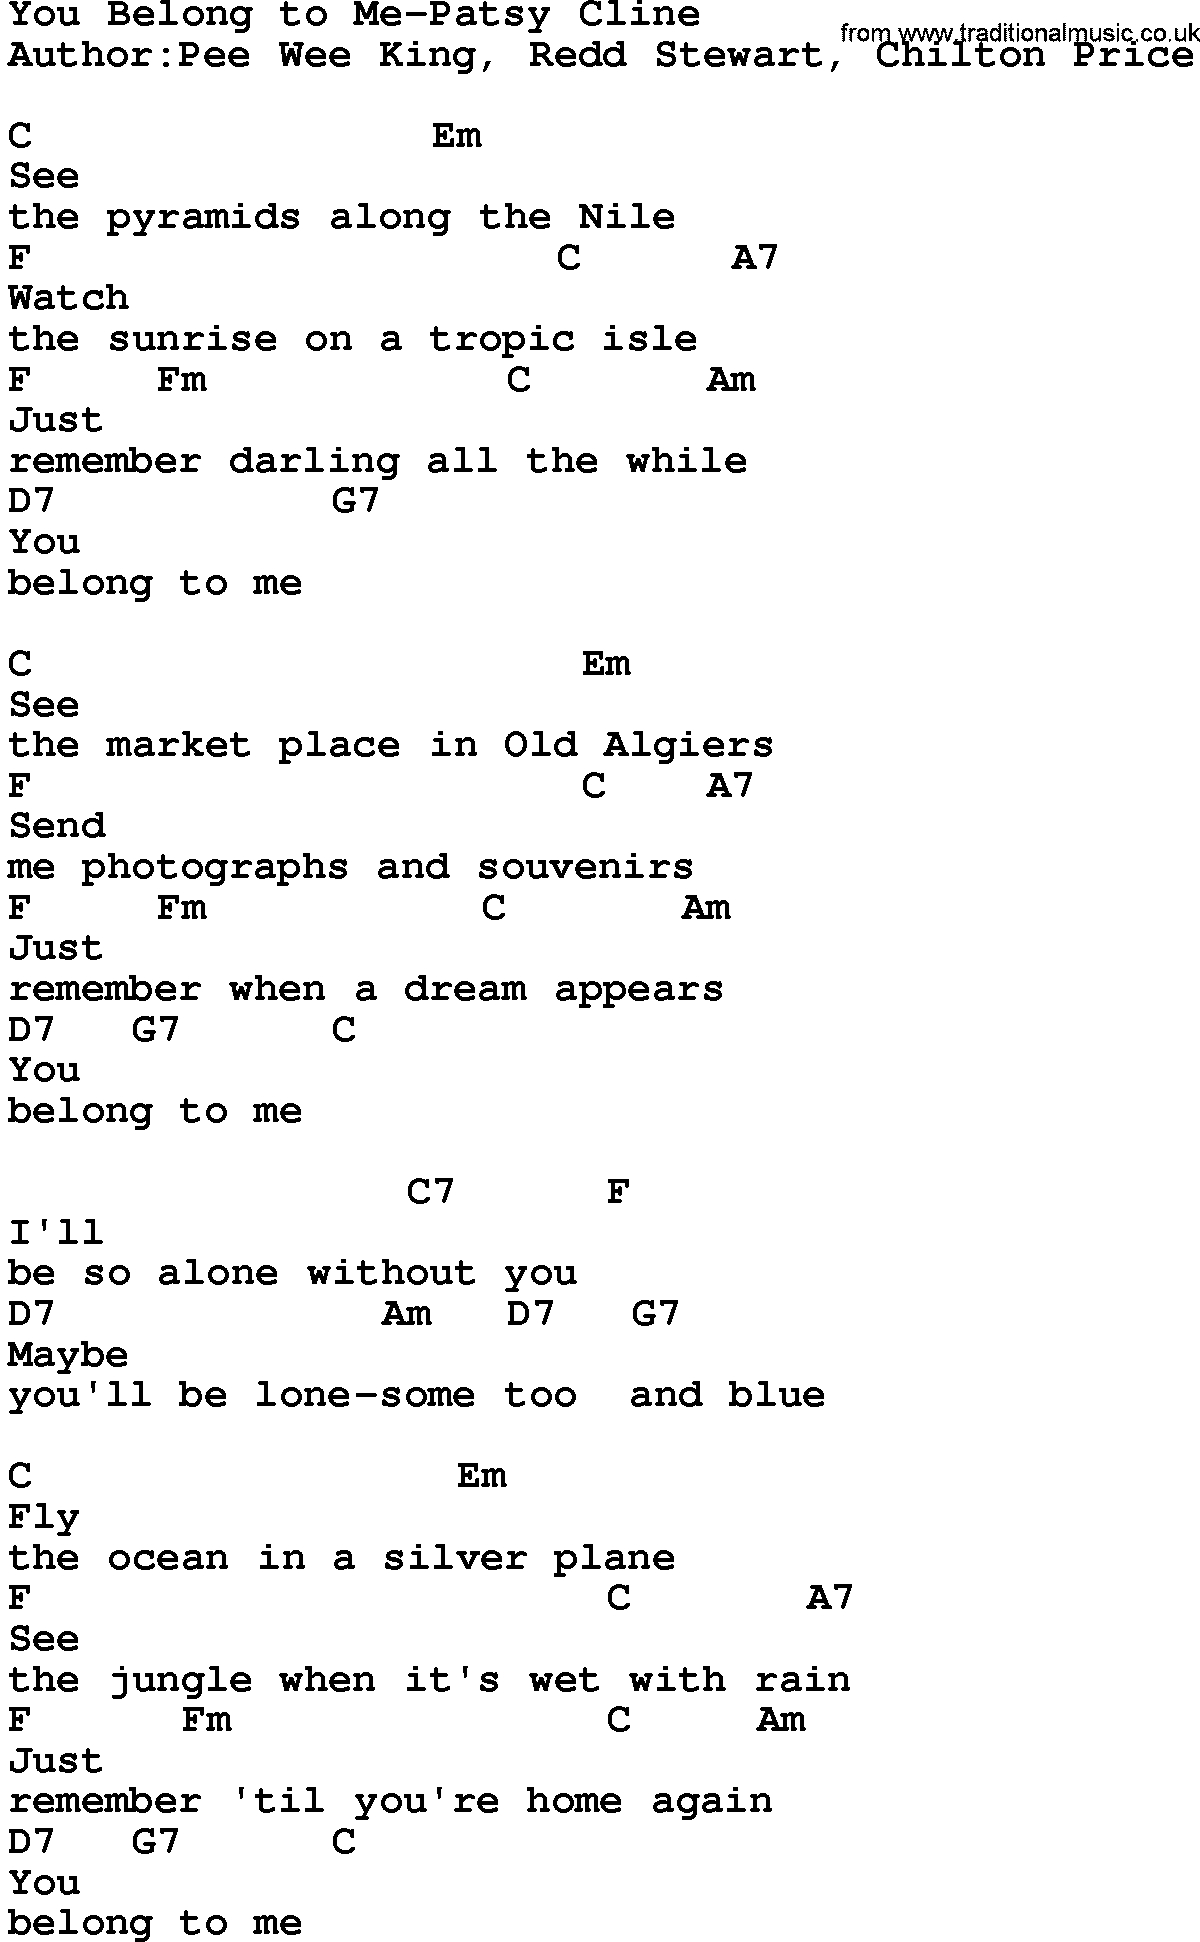 You Belong With Me Chords Country Musicyou Belong To Me Patsy Cline Lyrics And Chords